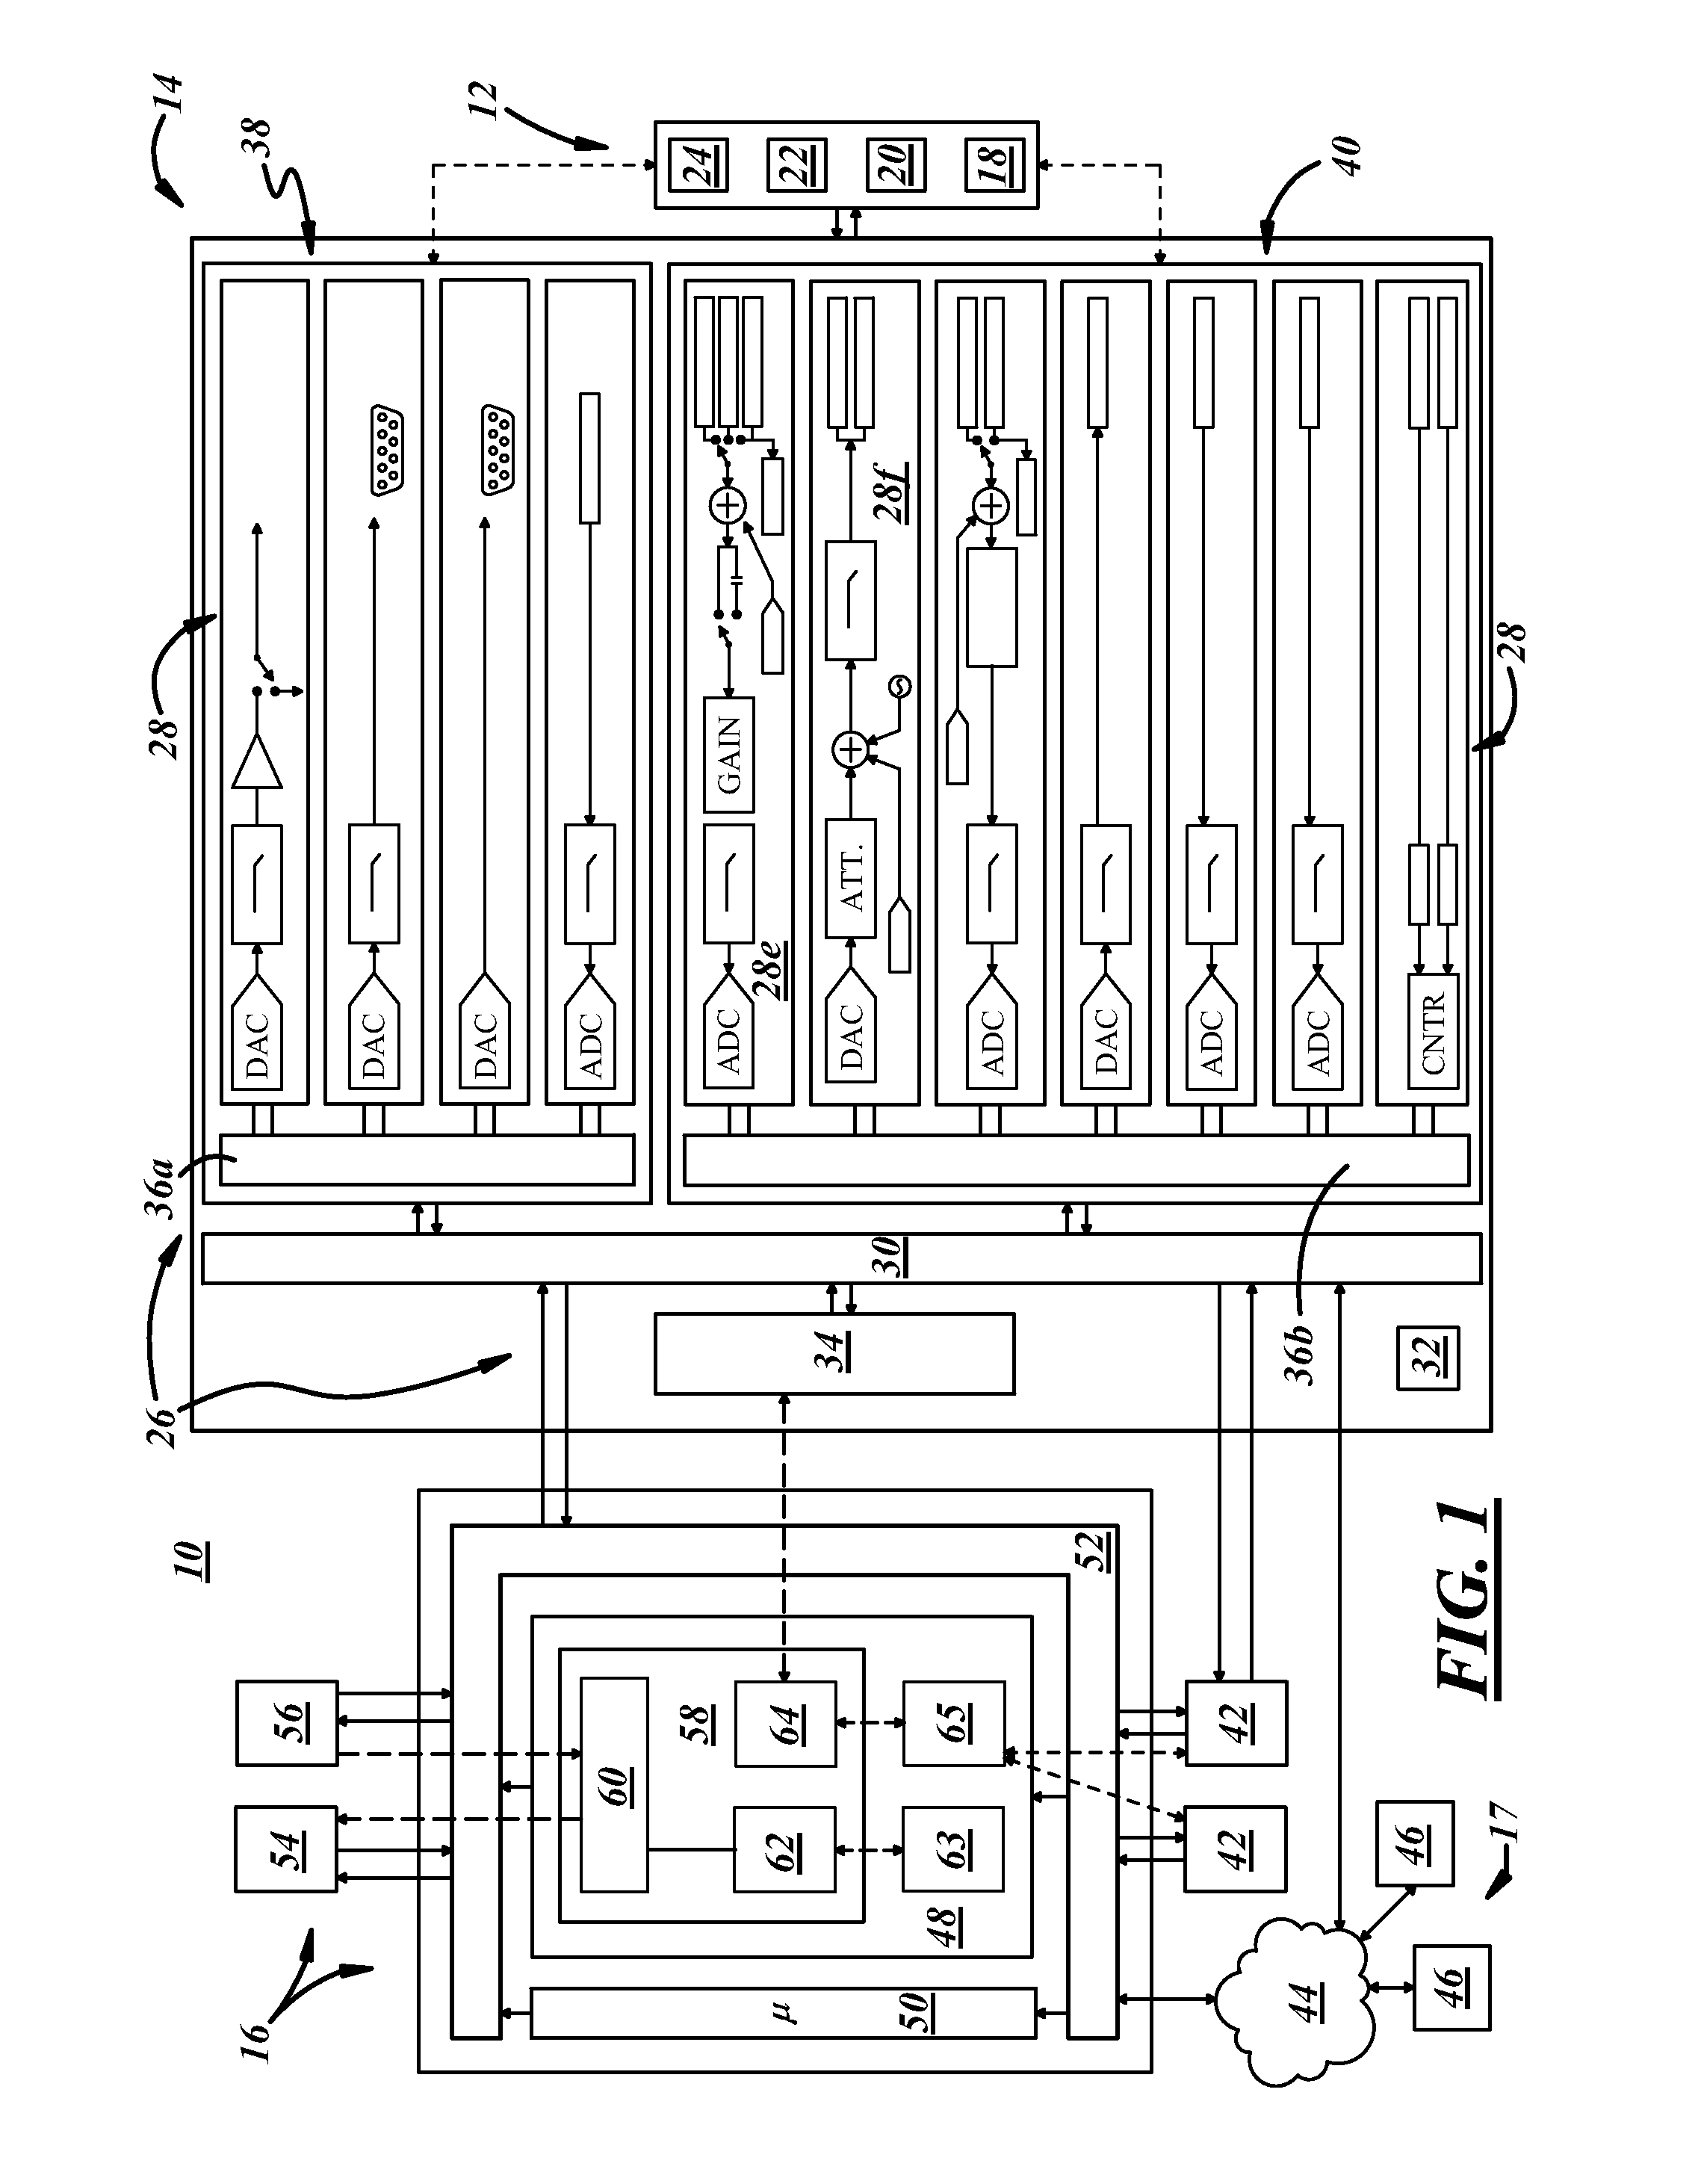 Frequency Measuring and Control Apparatus with Integrated Parallel Synchronized Oscillators